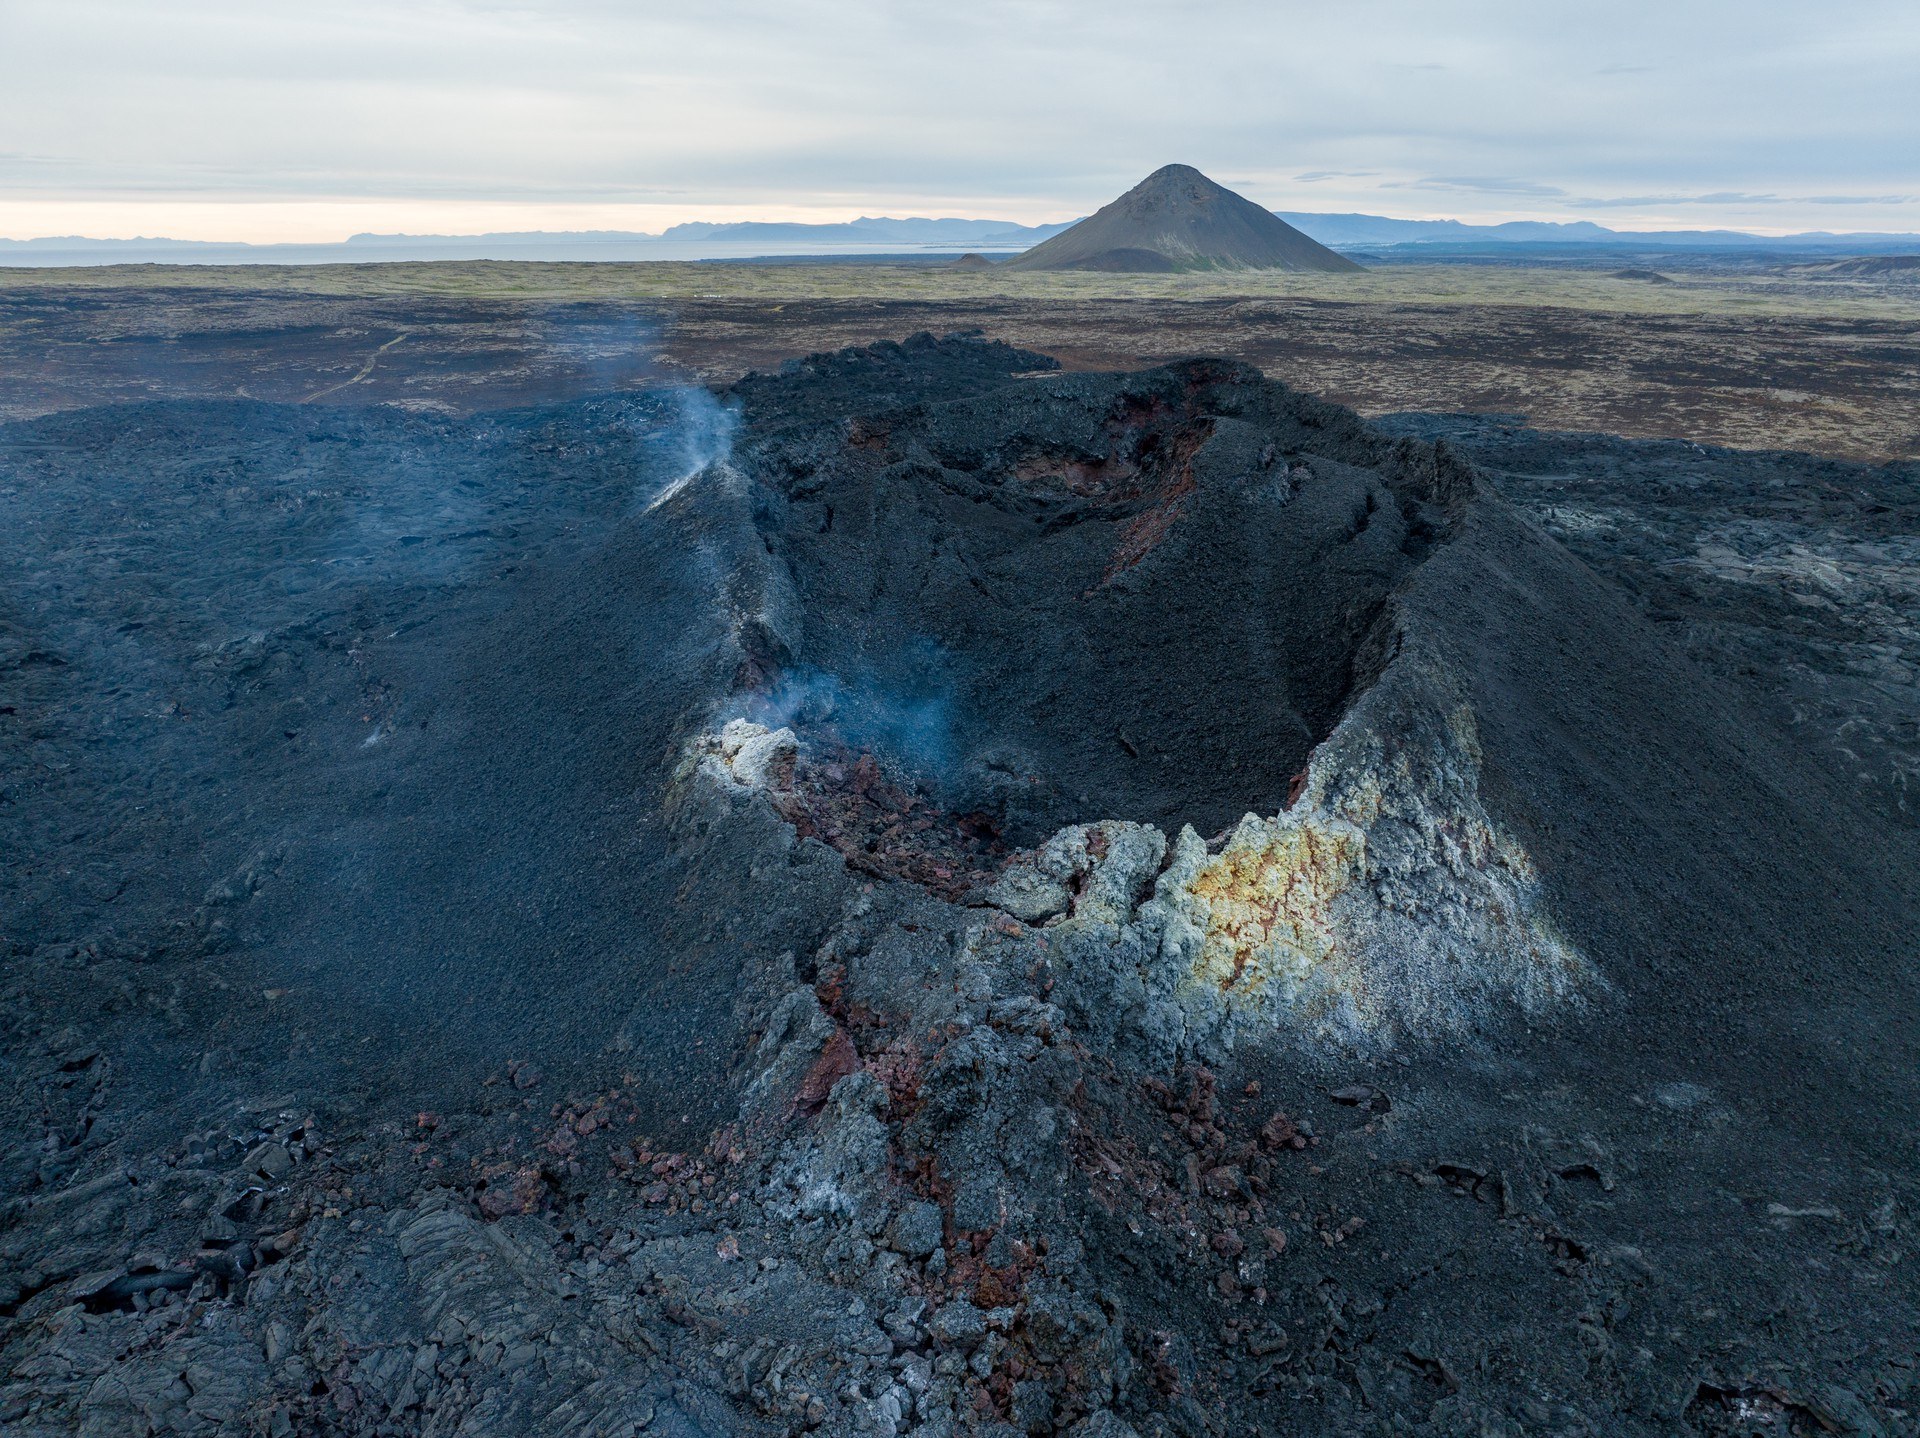 The Litli-Hrútur volcano in Iceland, where the DLR team is measuring infrared radiation